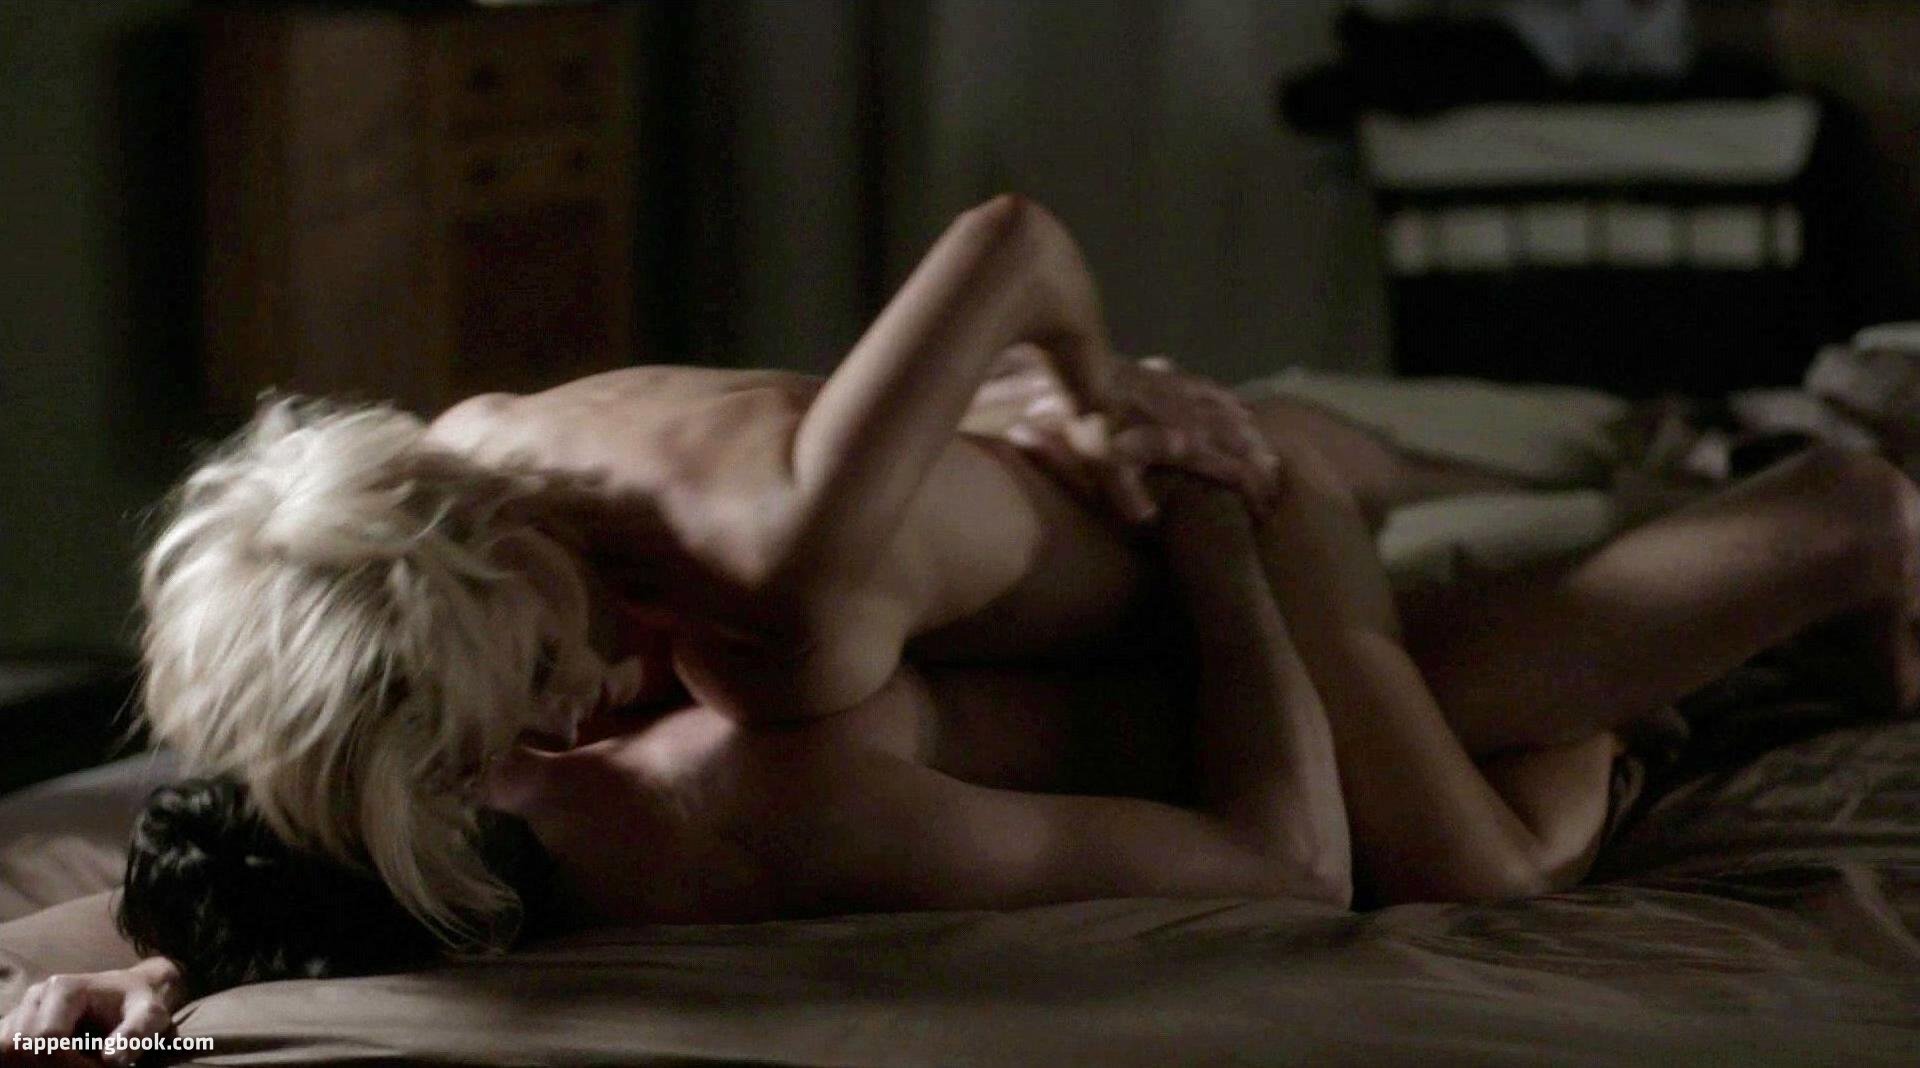 Kathleen Robertson Nude, The Fappening - Photo #290159 - FappeningBook.